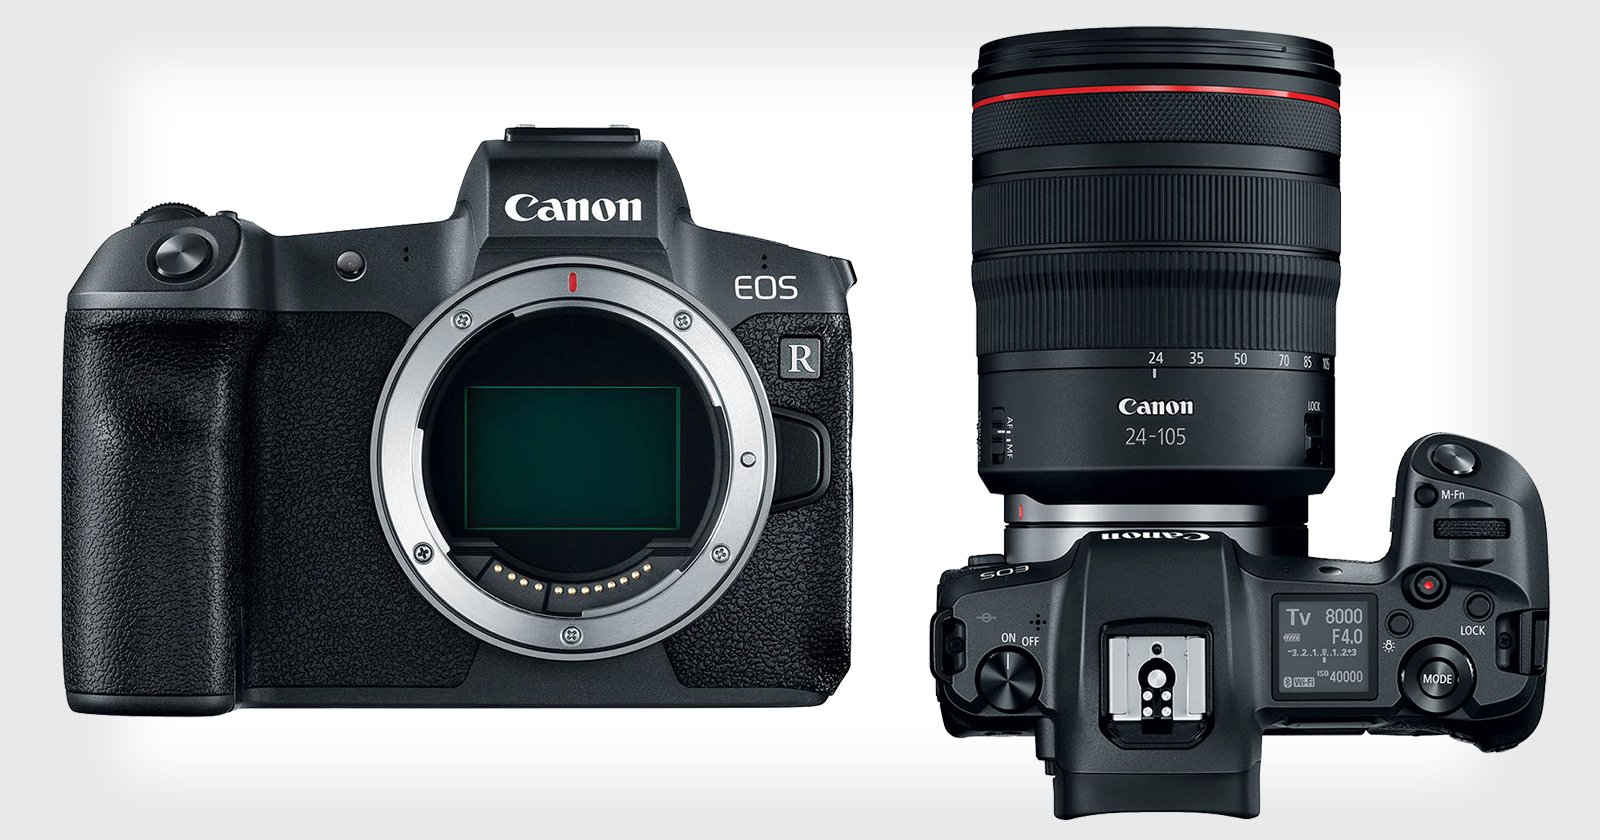 The Canon Eos R Mark Ii Is Already In Testing Announcement At Photokina Report